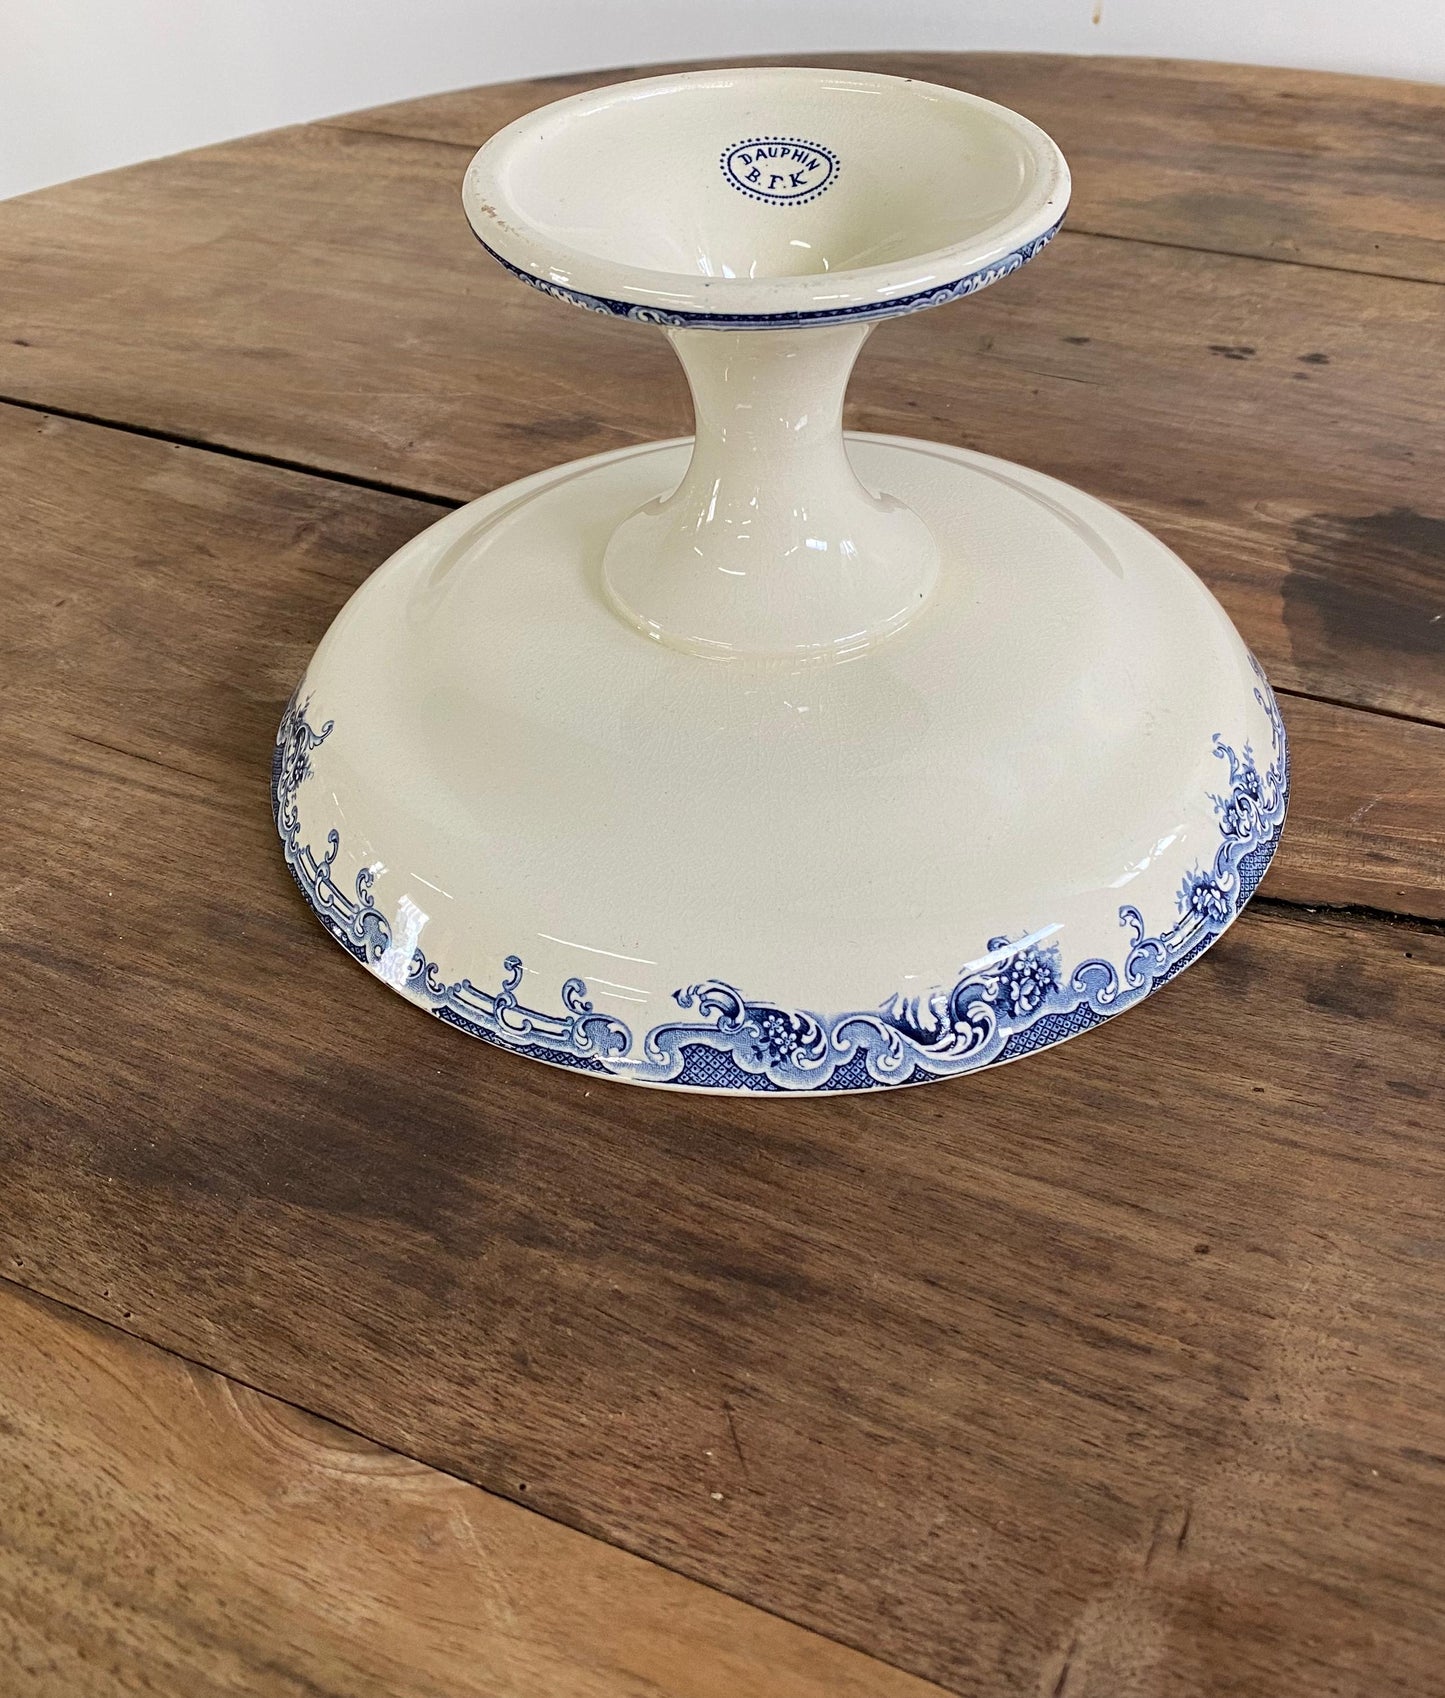 "BFK Boch" DAUPHIN Cake stand